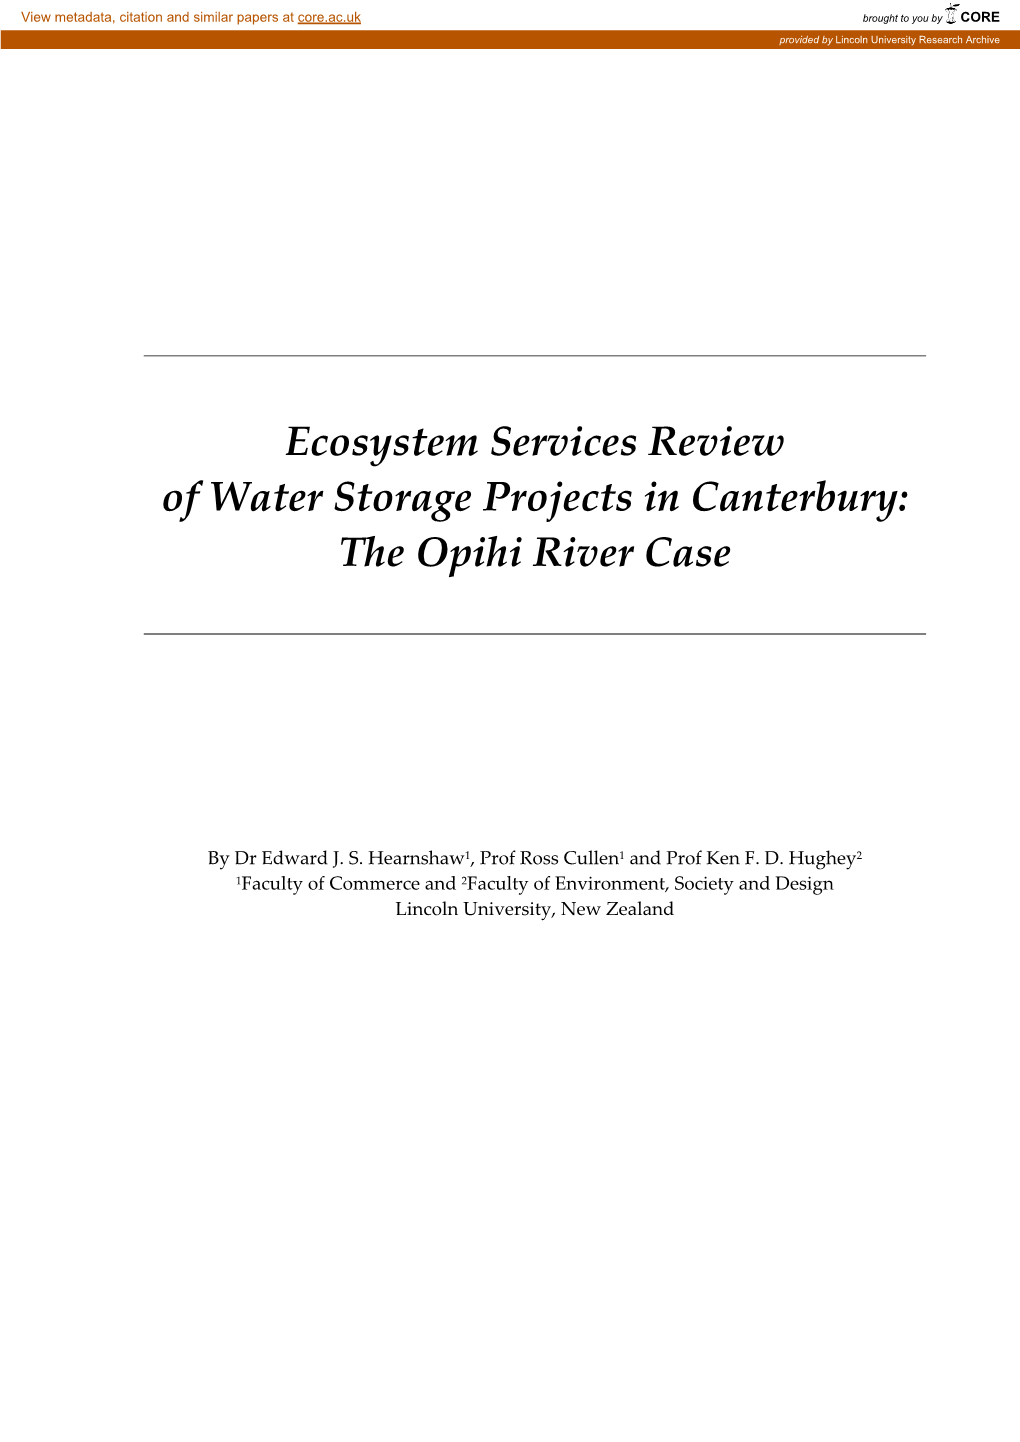 Ecosystem Services Review of Water Storage Projects in Canterbury: the Opihi River Case